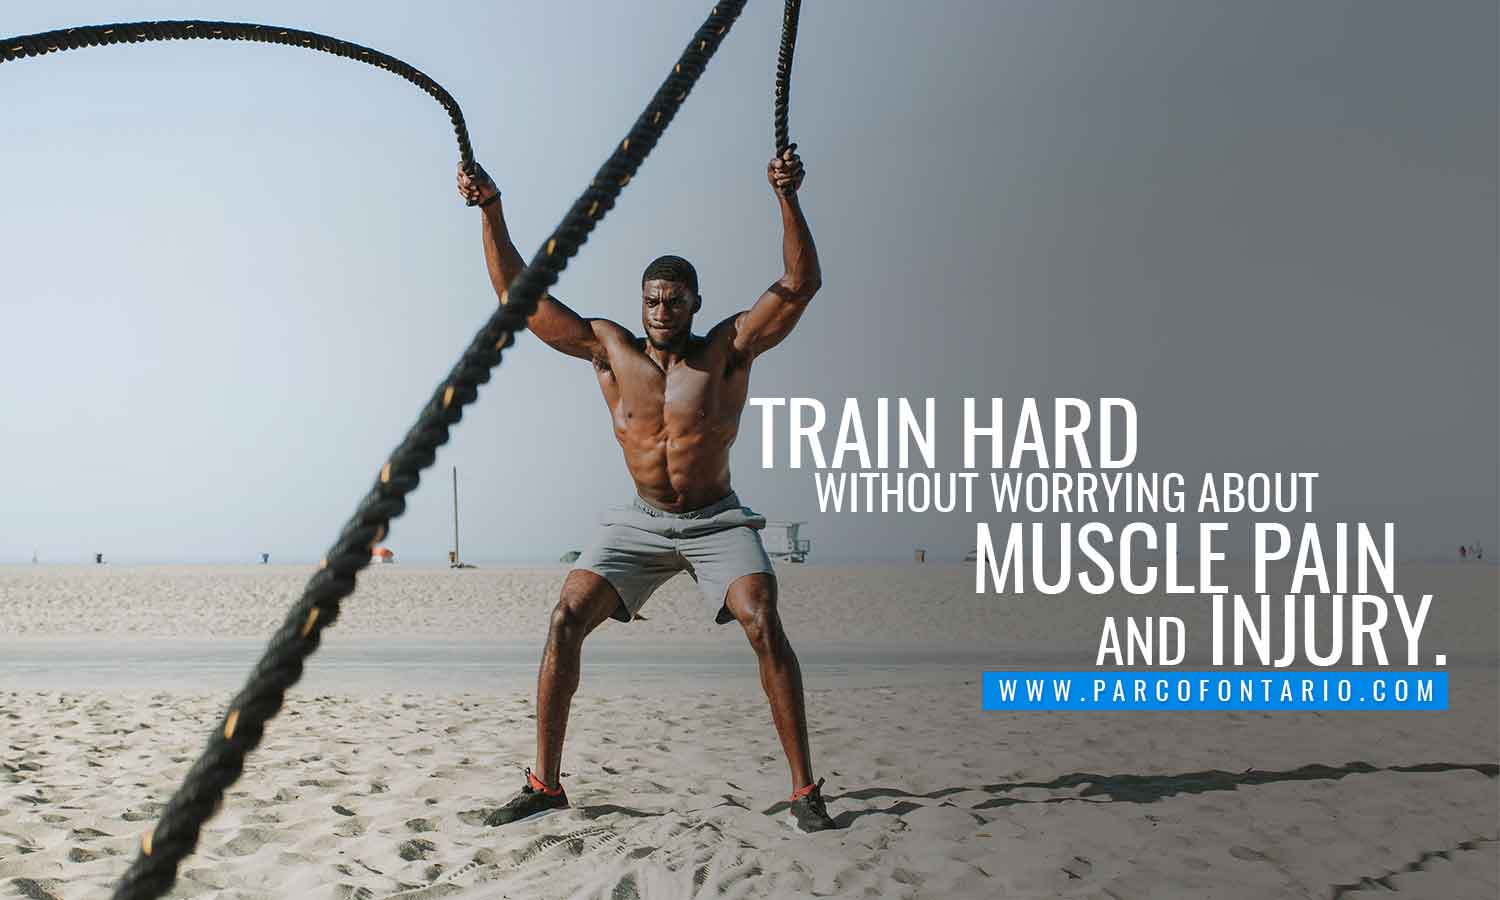 Train hard without worrying